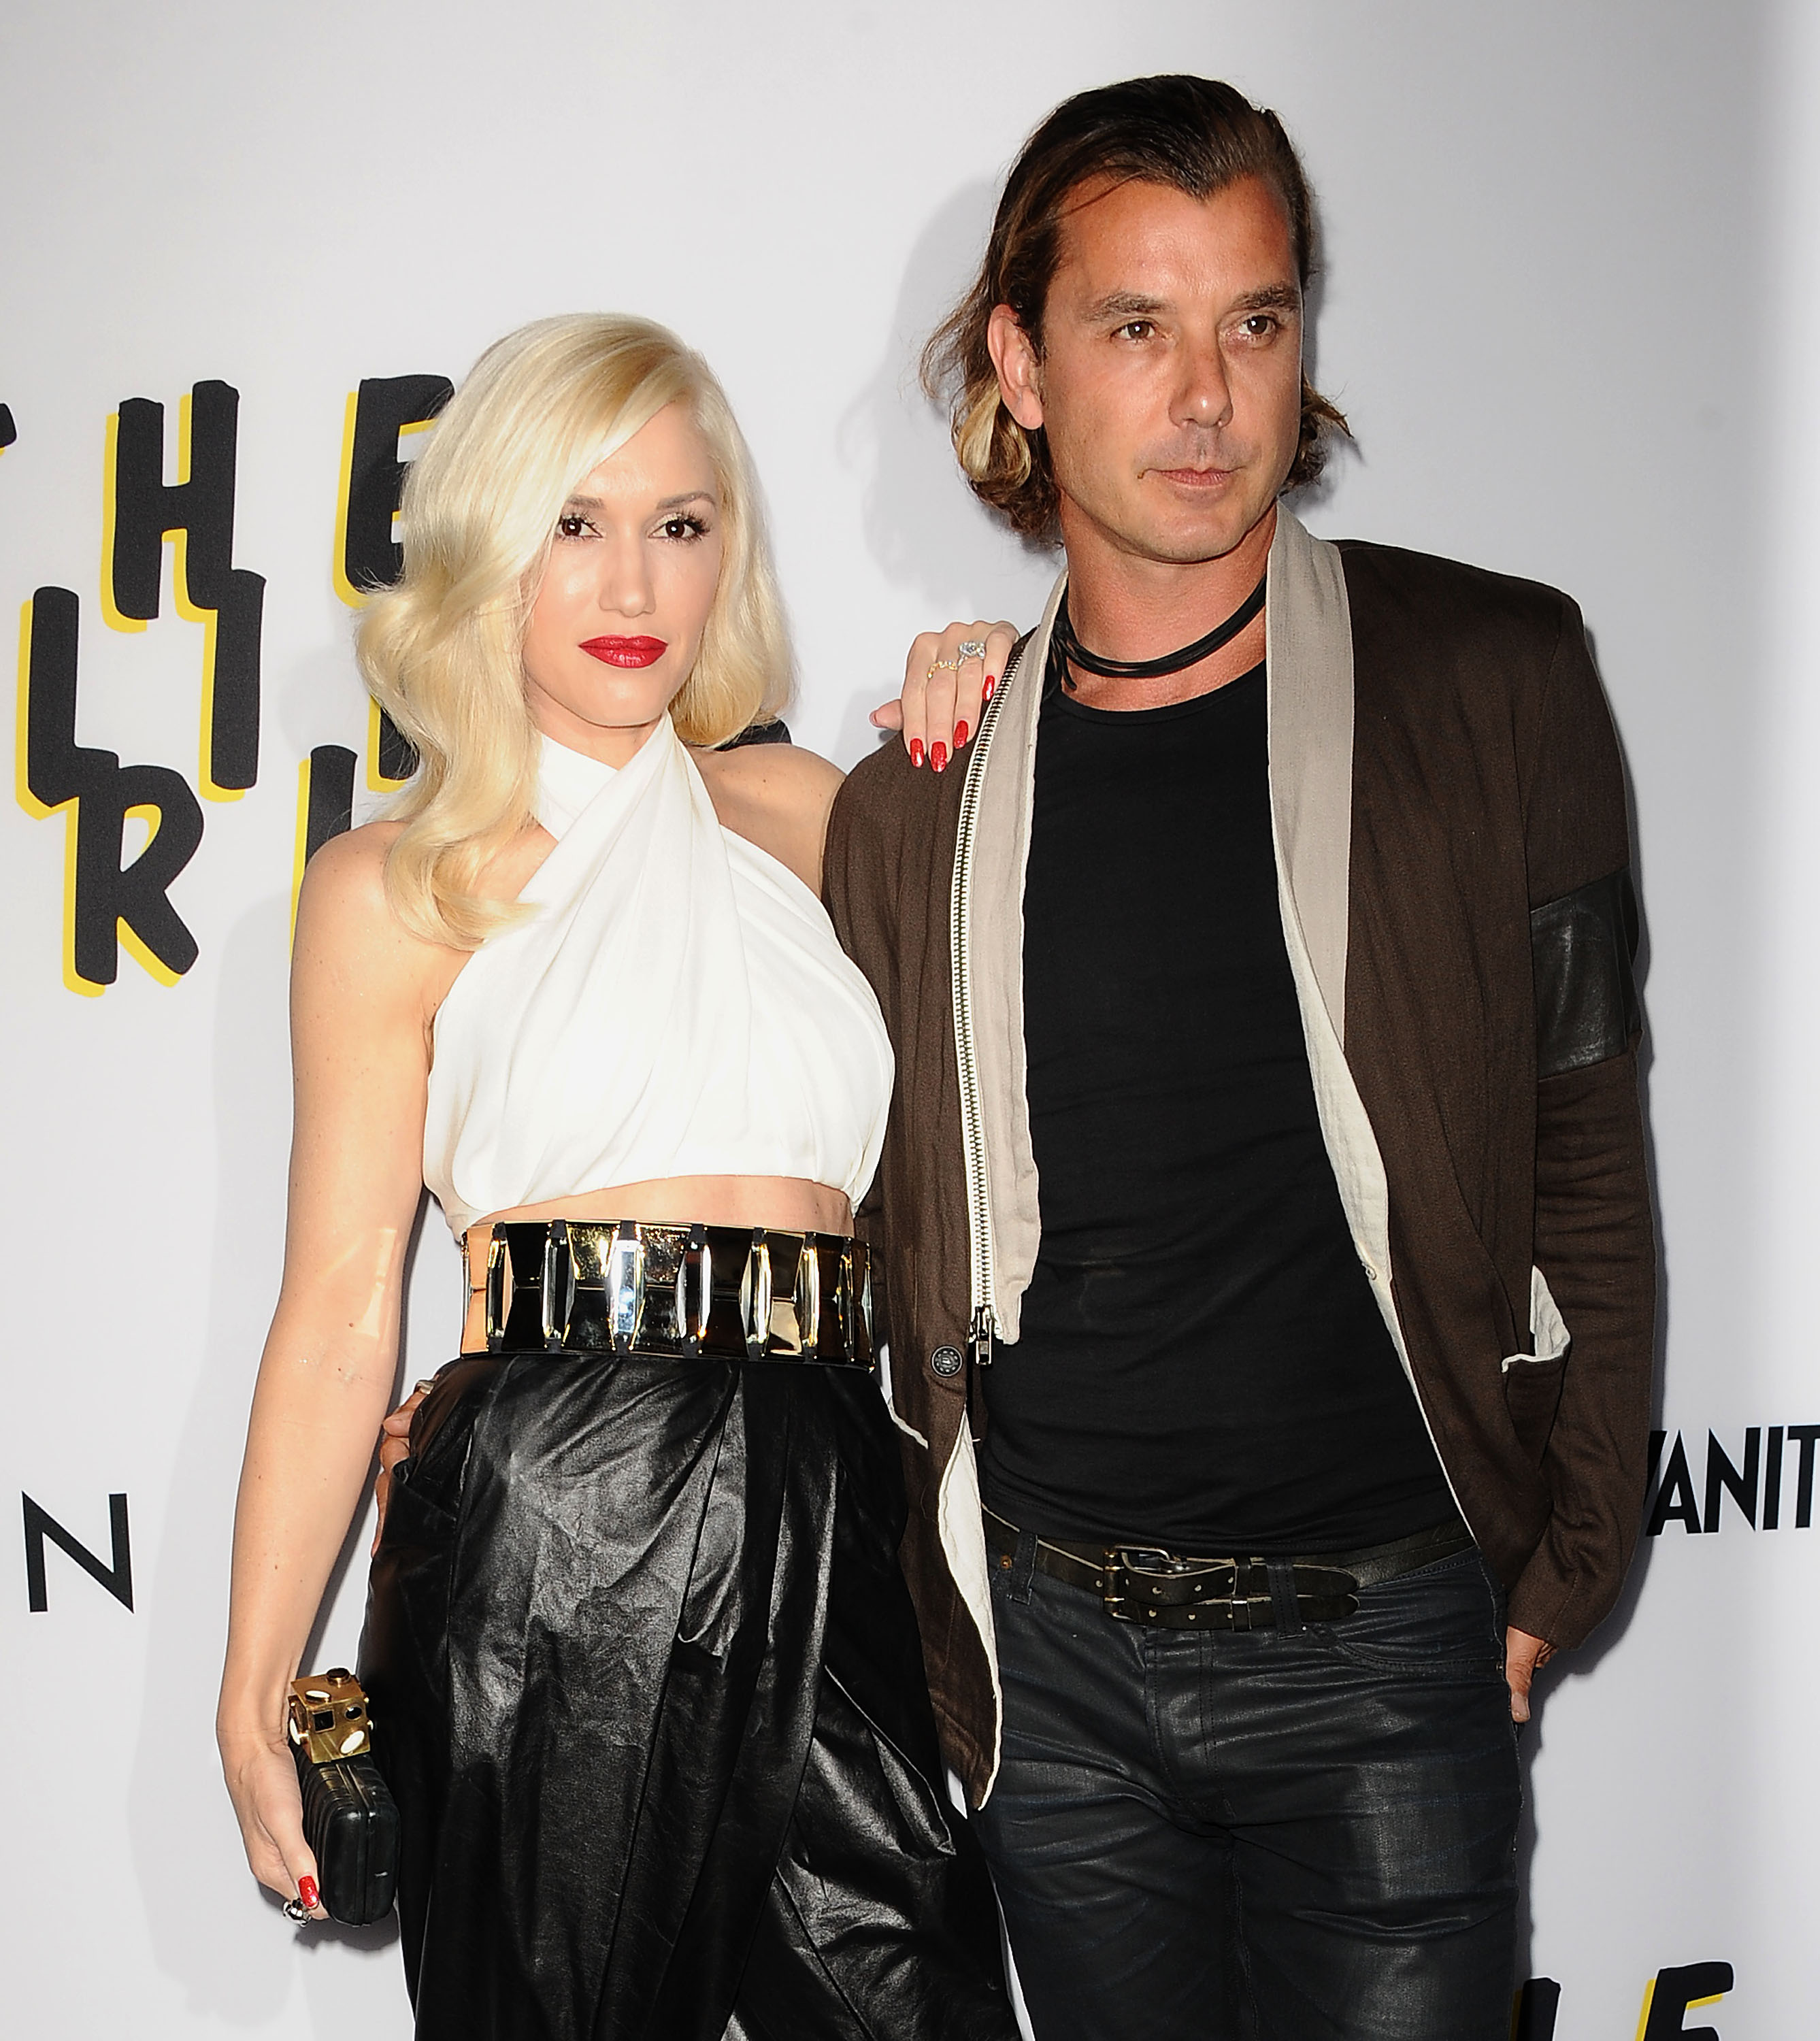 Gwen Stefani and Gavin Rossdale attend the premiere of "The Bling Ring" at Directors Guild Of America in Los Angeles, California, on June 4, 2013. | Source: Getty Images